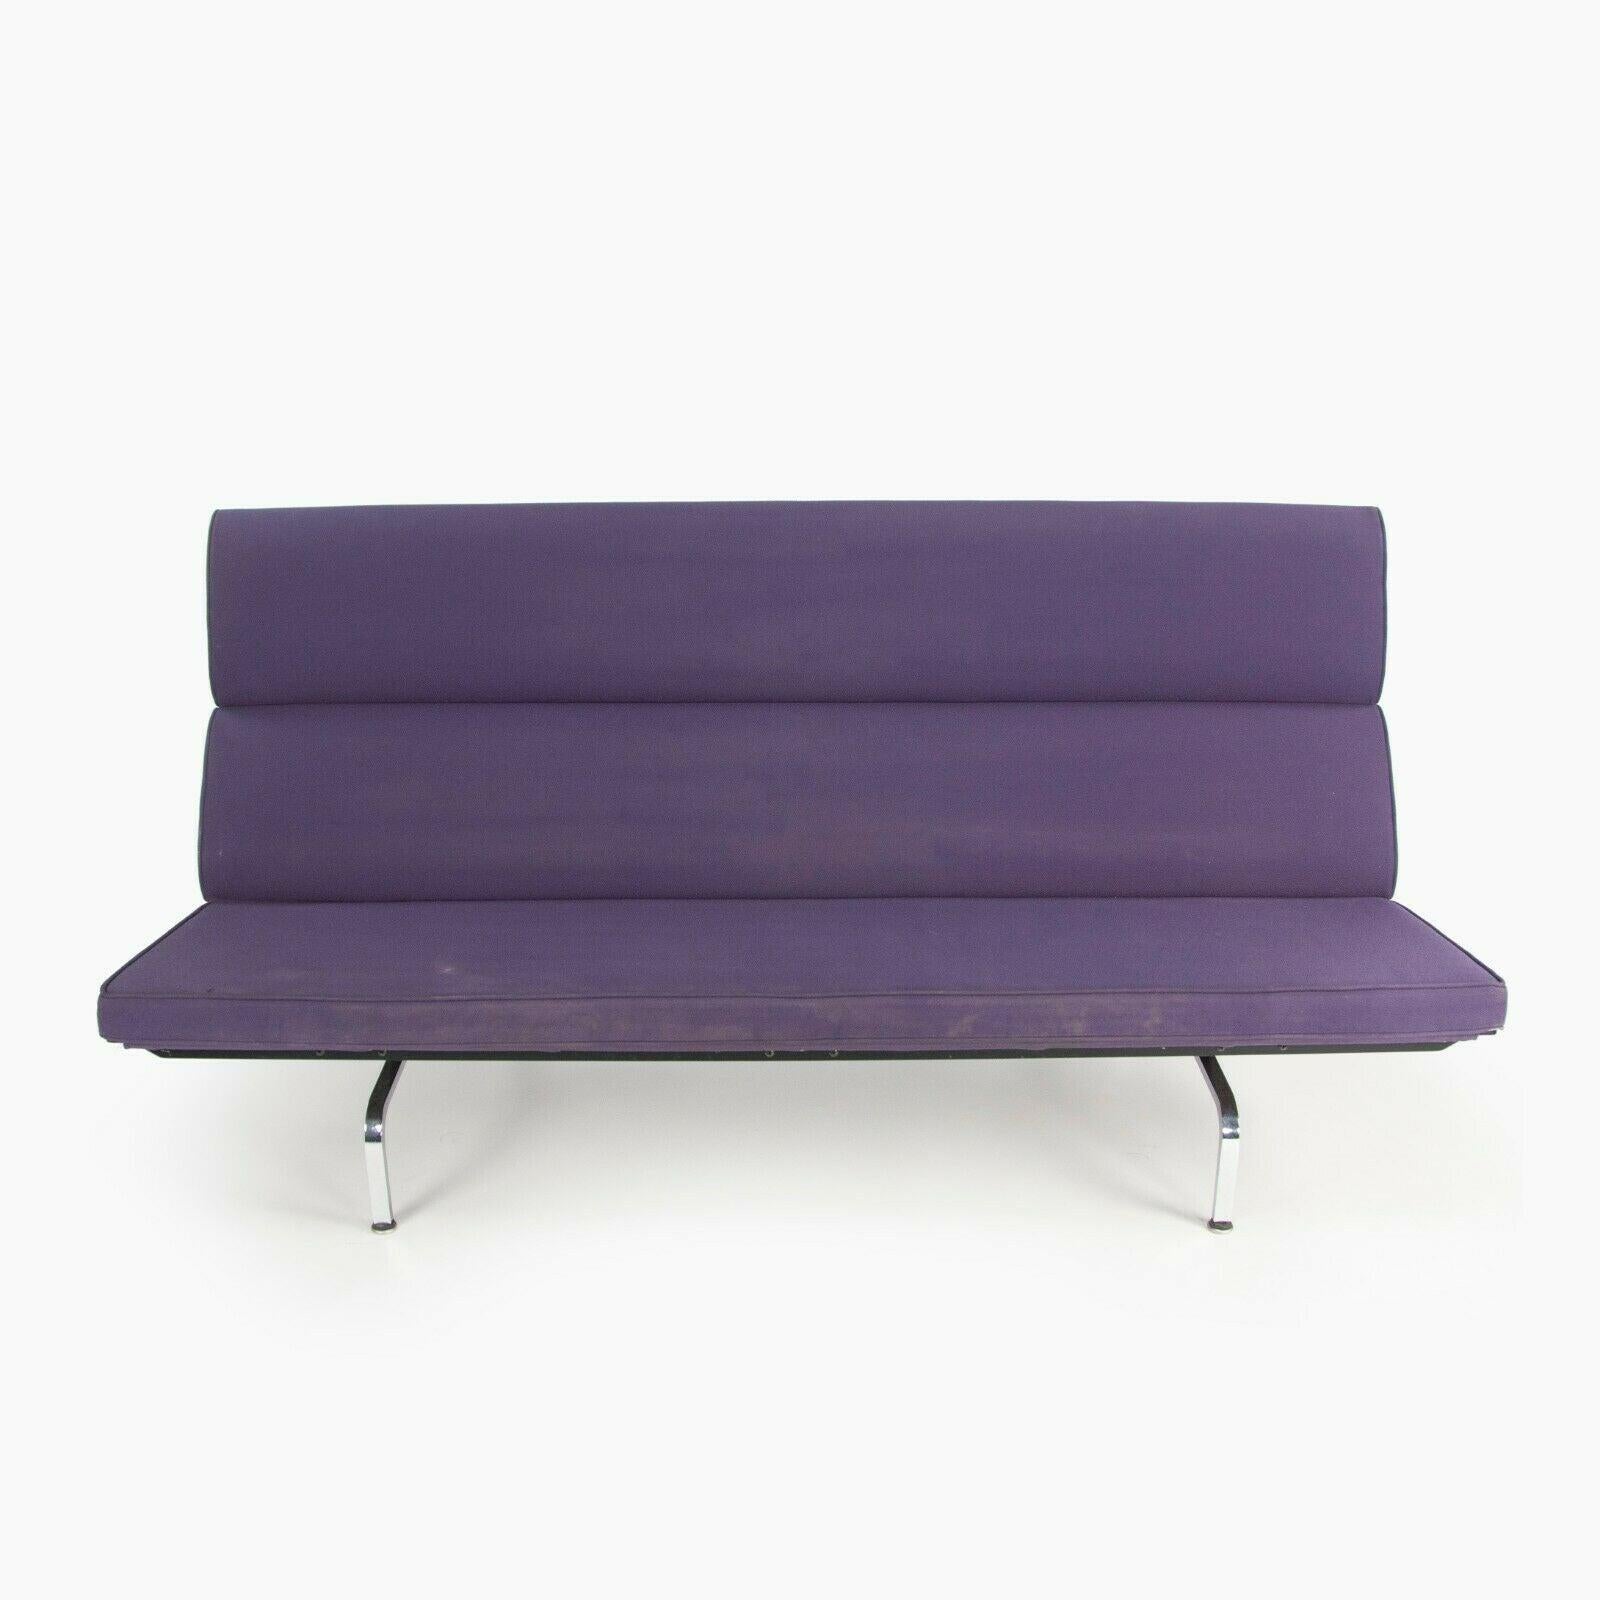 2006 Herman Miller Ray and Charles Eames Sofa Compact Purple Fabric Upholstery In Good Condition For Sale In Philadelphia, PA